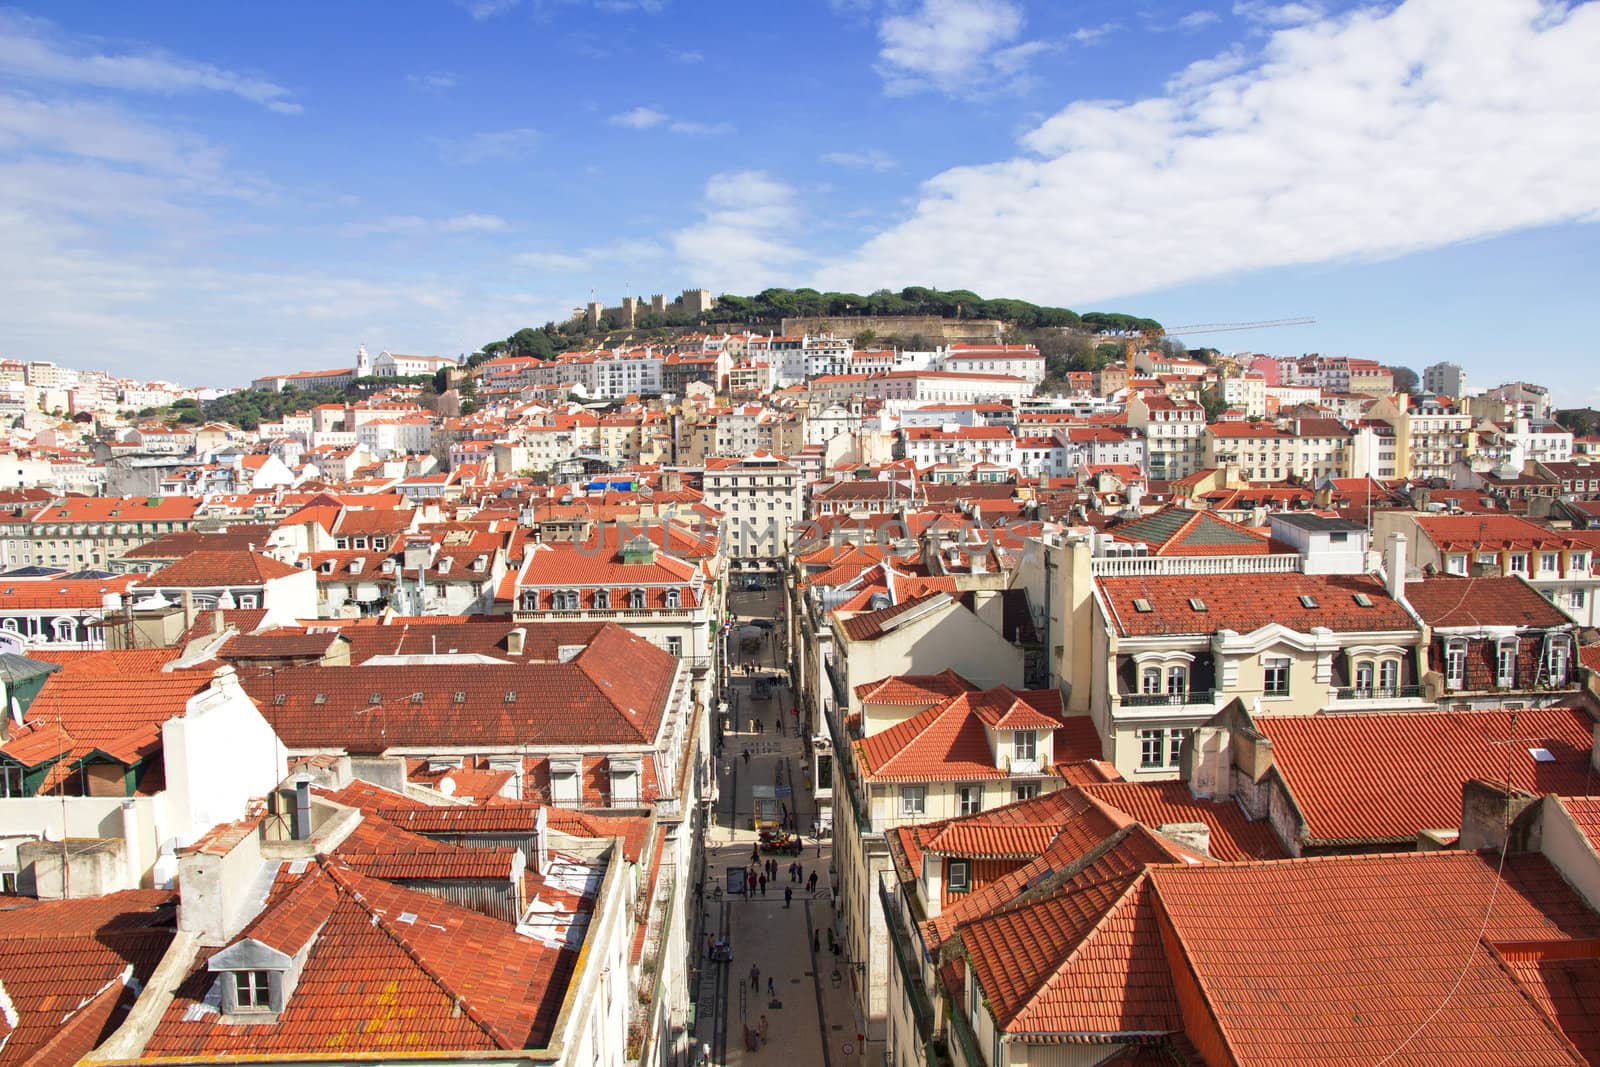 Portugal. Panorama of Lisbon from a viewing point of Santa Justa


